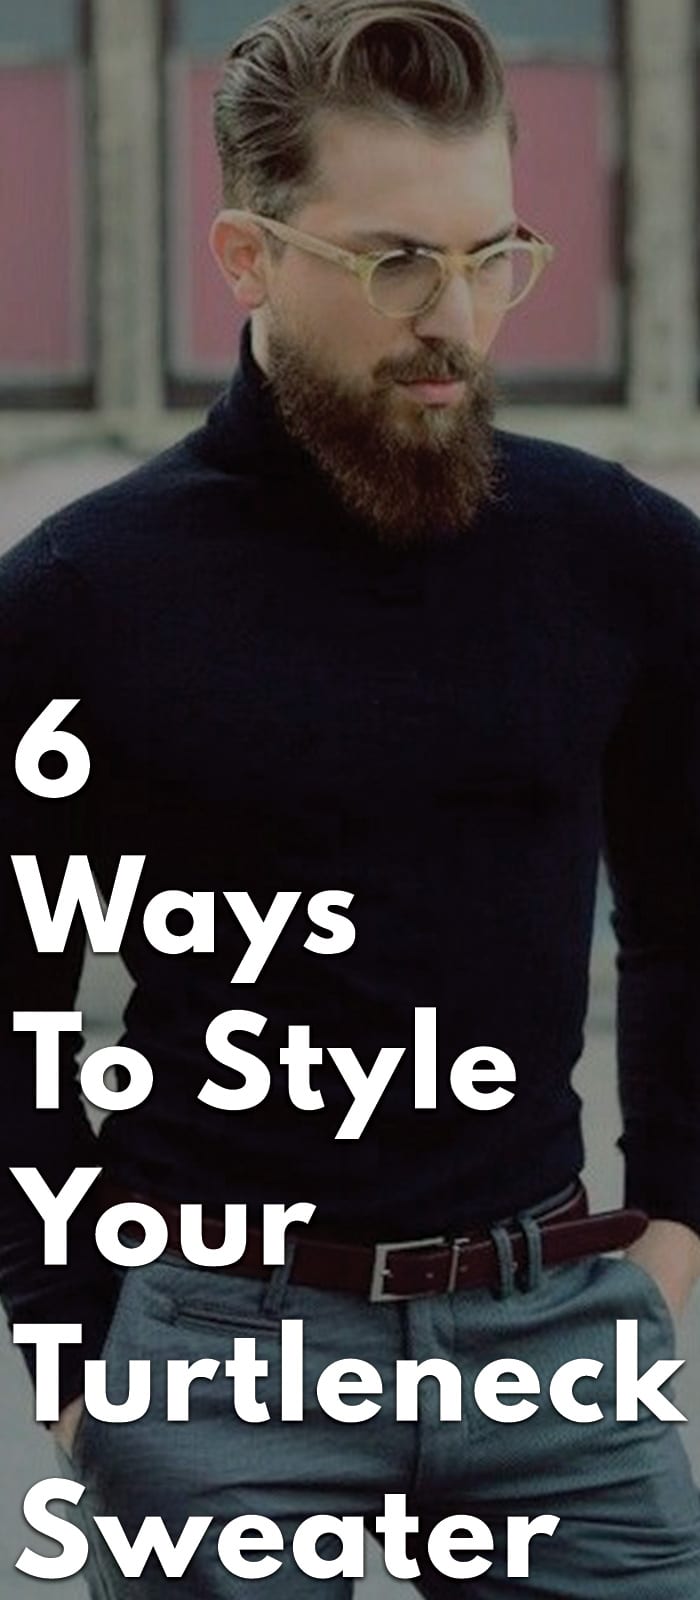 6-Ways-to-Style-Your-Turtleneck-Sweater